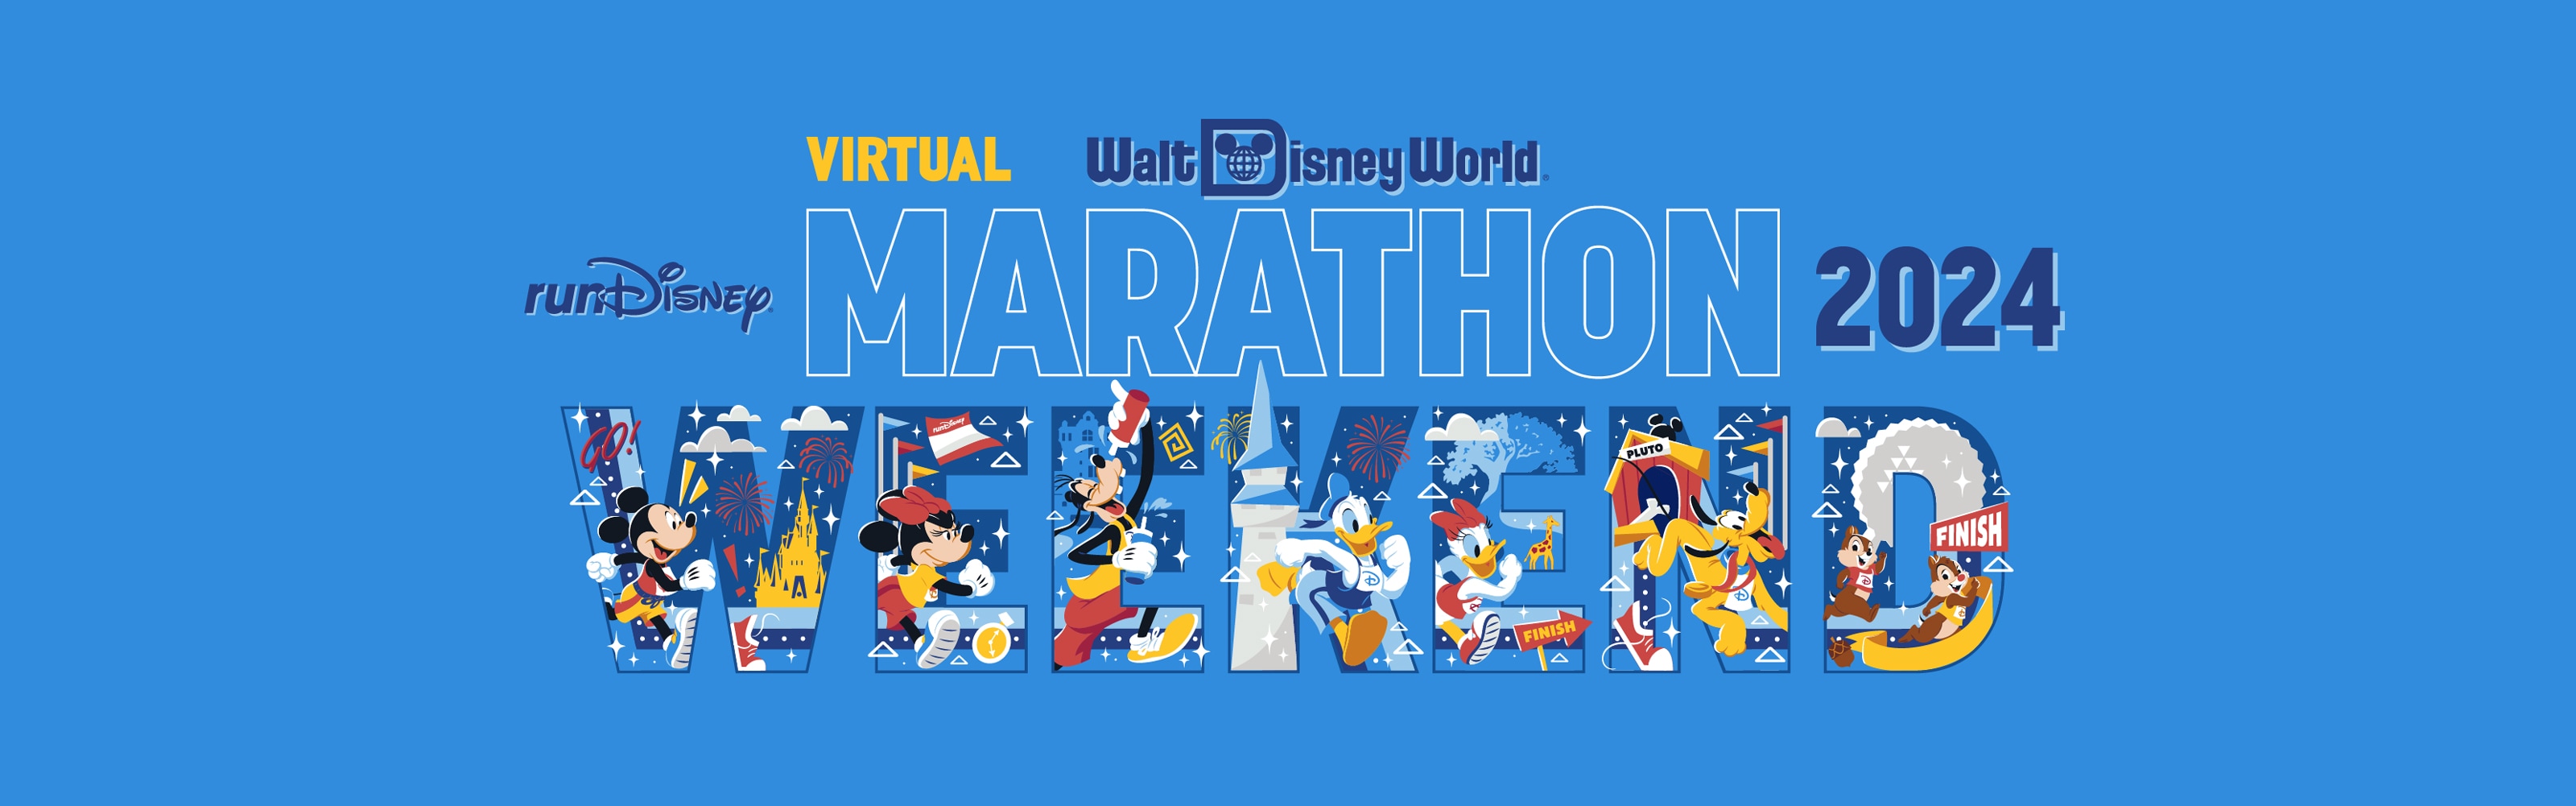 Artwork for the Virtual Walt Disney World Marathon Weekend featuring characters such as Mickey Mouse